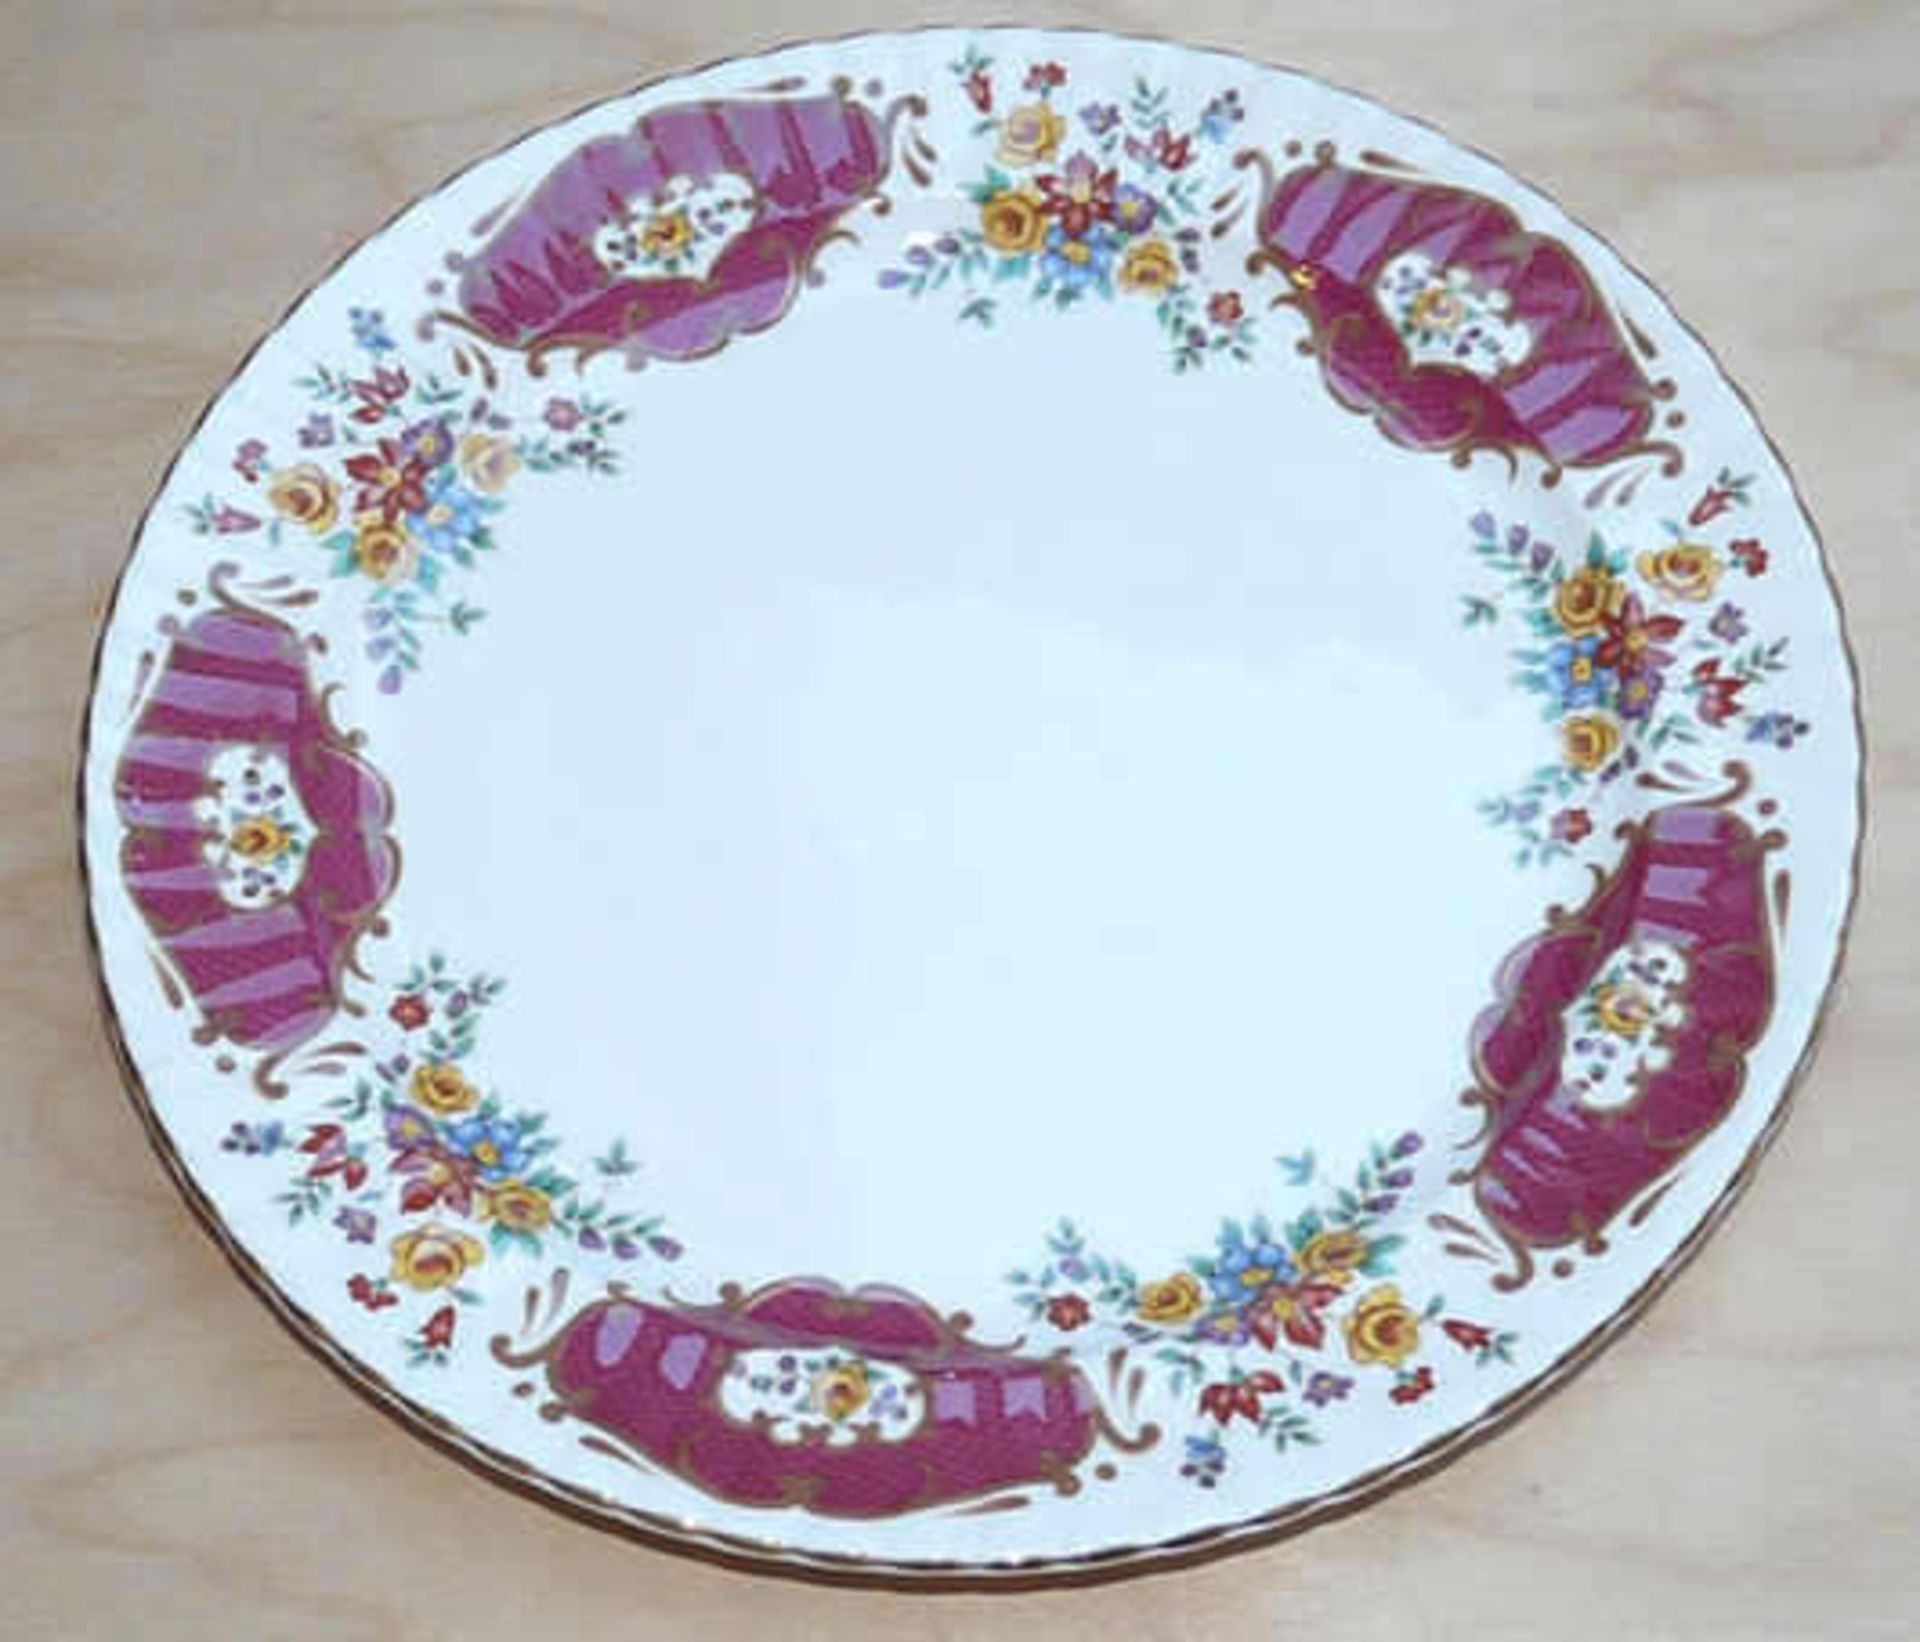 Kaffeeservice rot mit Blumendesign und Goldrand, Made in England, Royal Victorian bone china; - Image 3 of 4